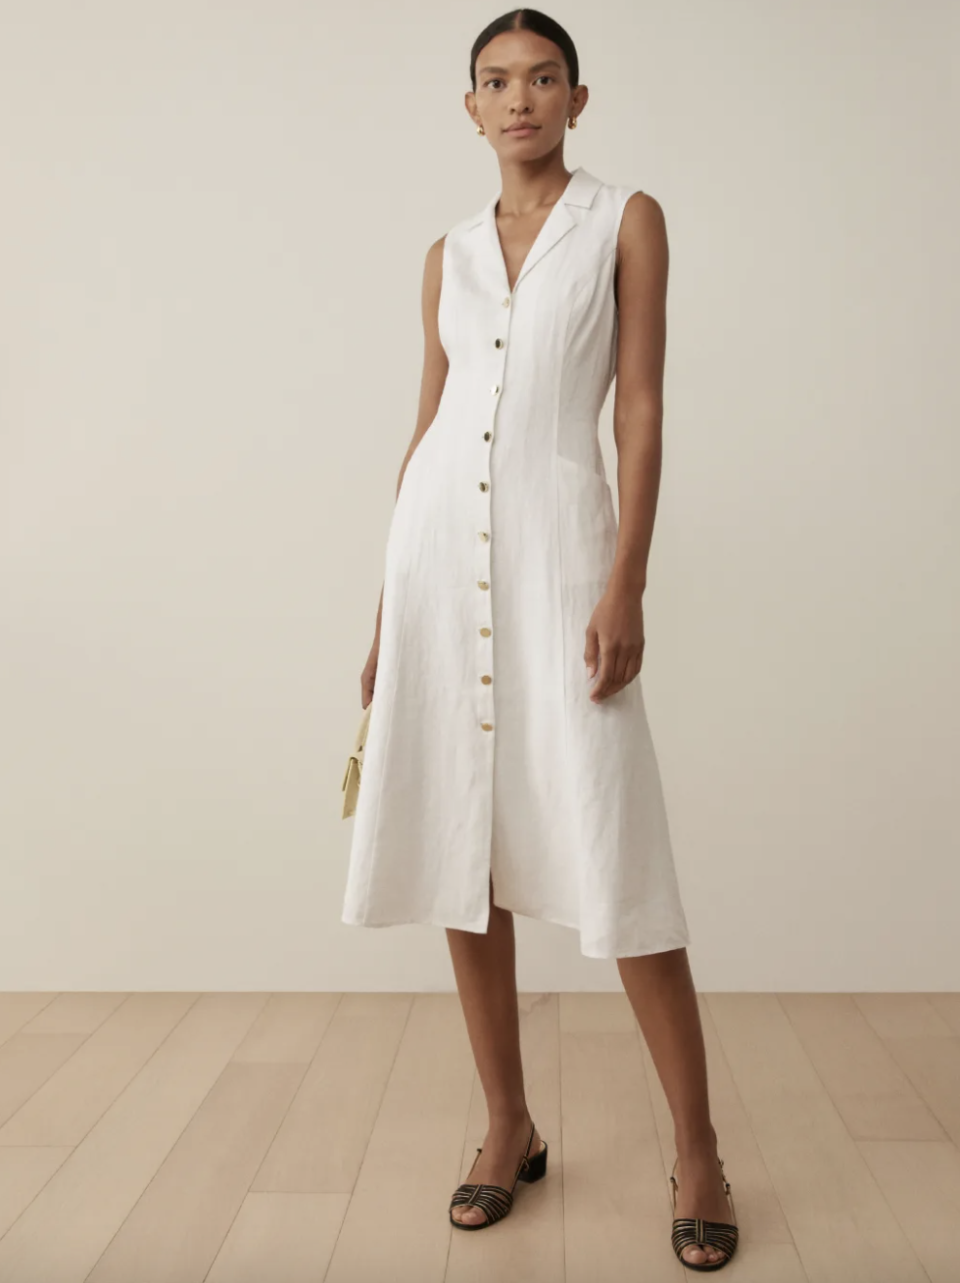 model with slicked back hair and black sandals in white sleeveless Greene Linen Dress (Photo via Reformation)